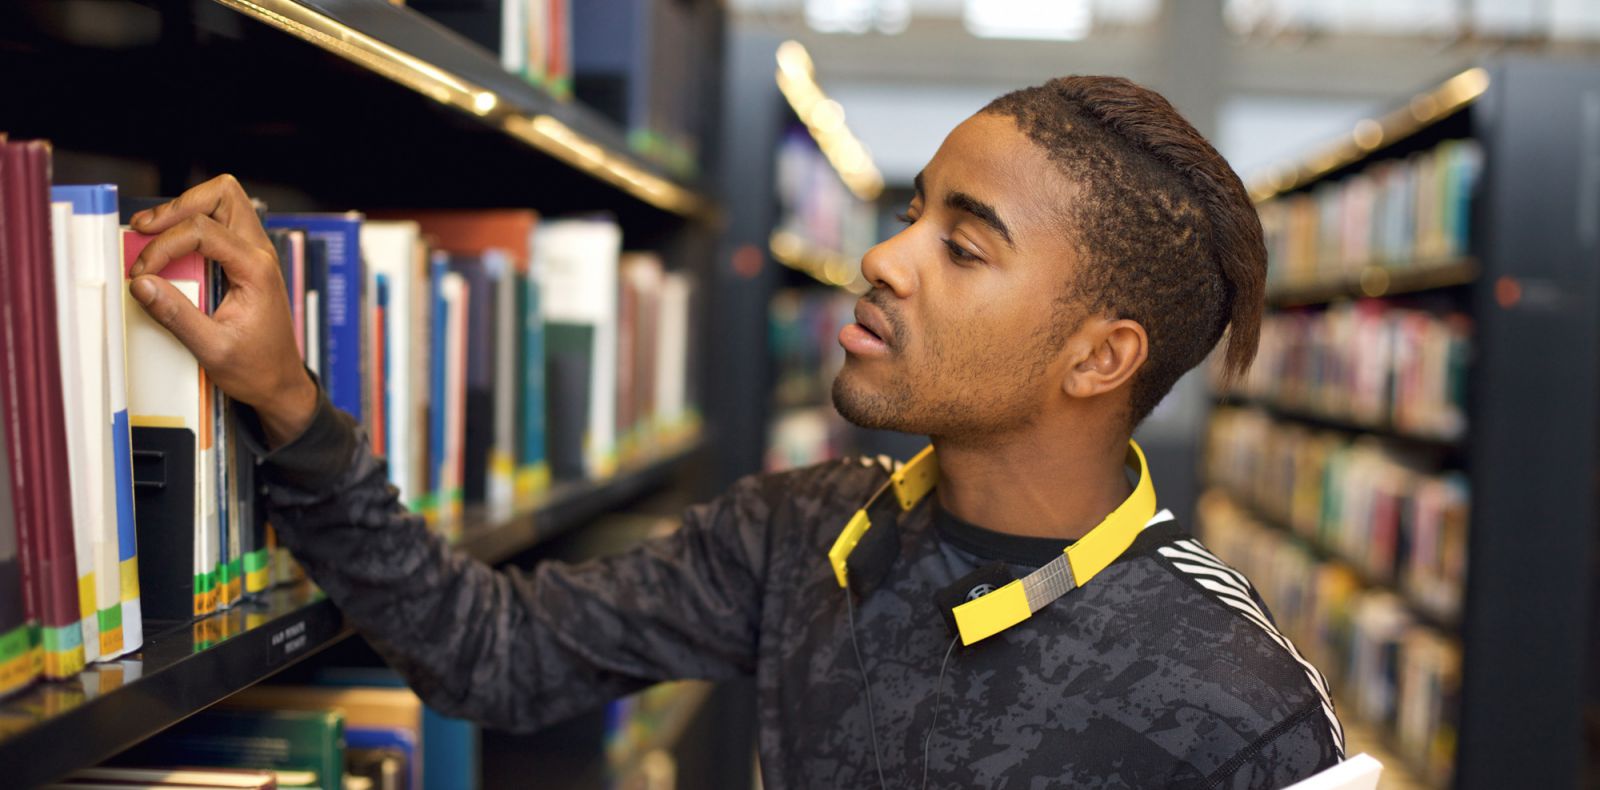 Student pulling book off shelf in library